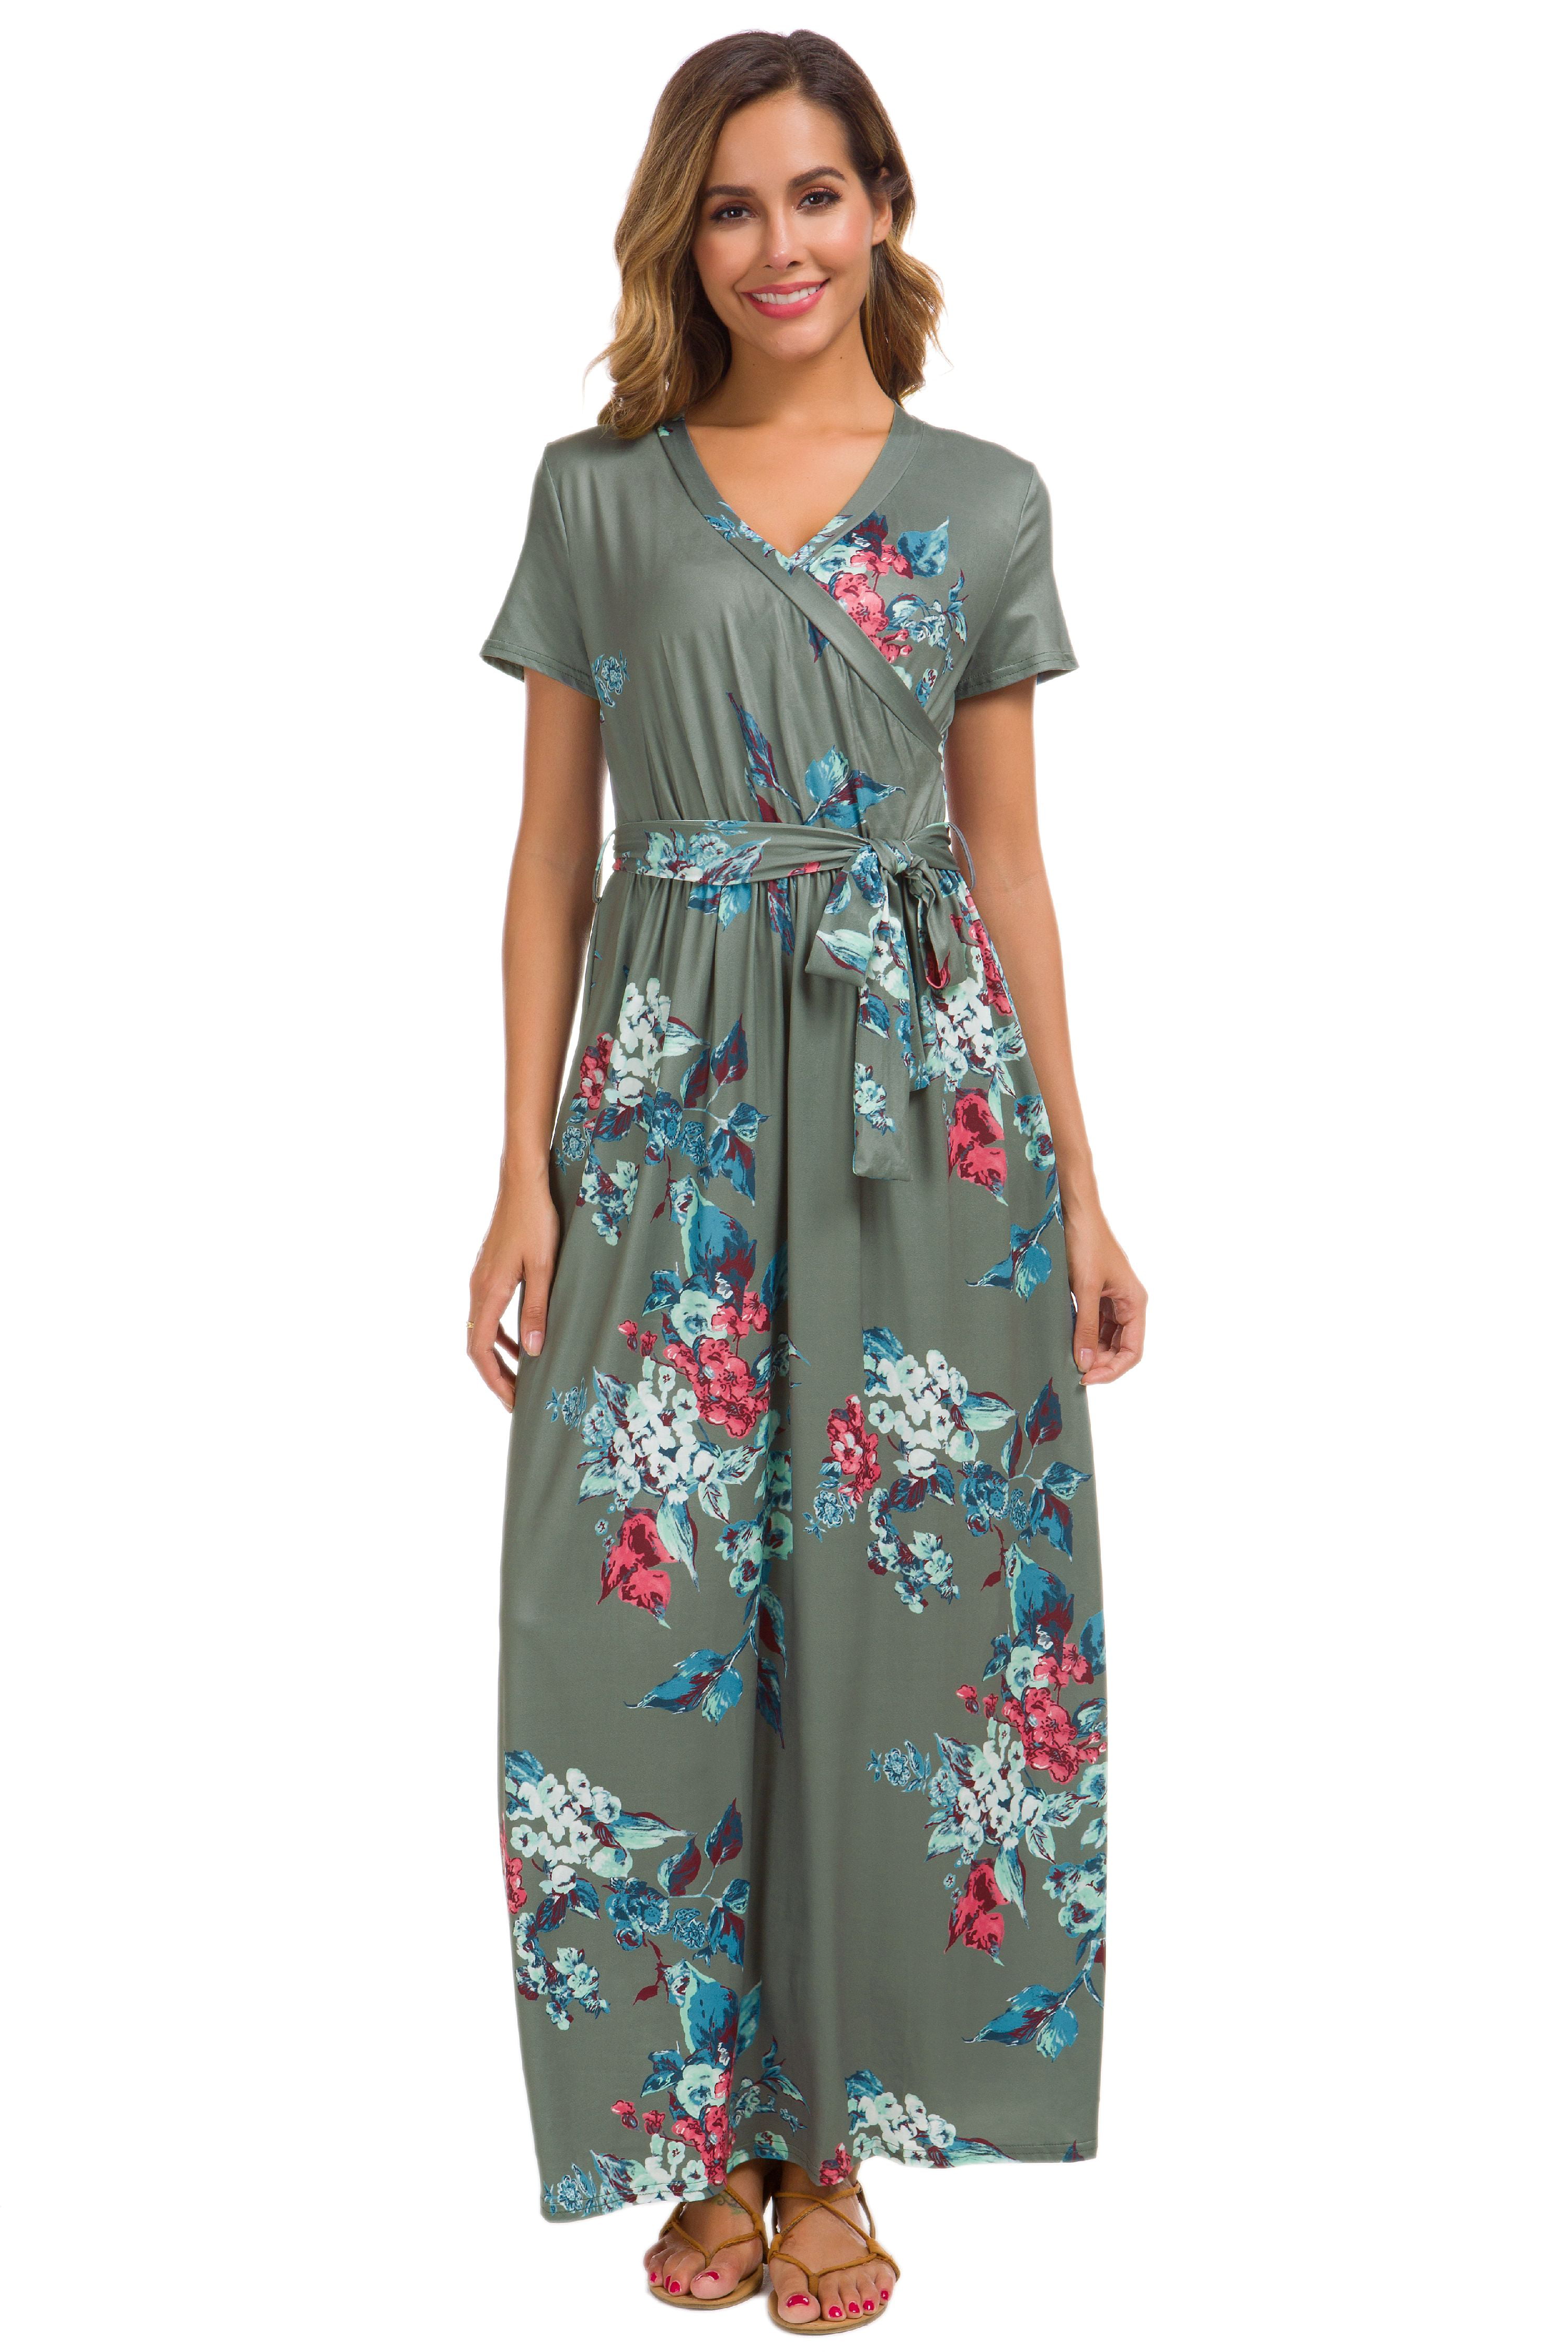 Lilly Posh - Regular and Plus Sizes Floral Tie Front Dress - Walmart ...